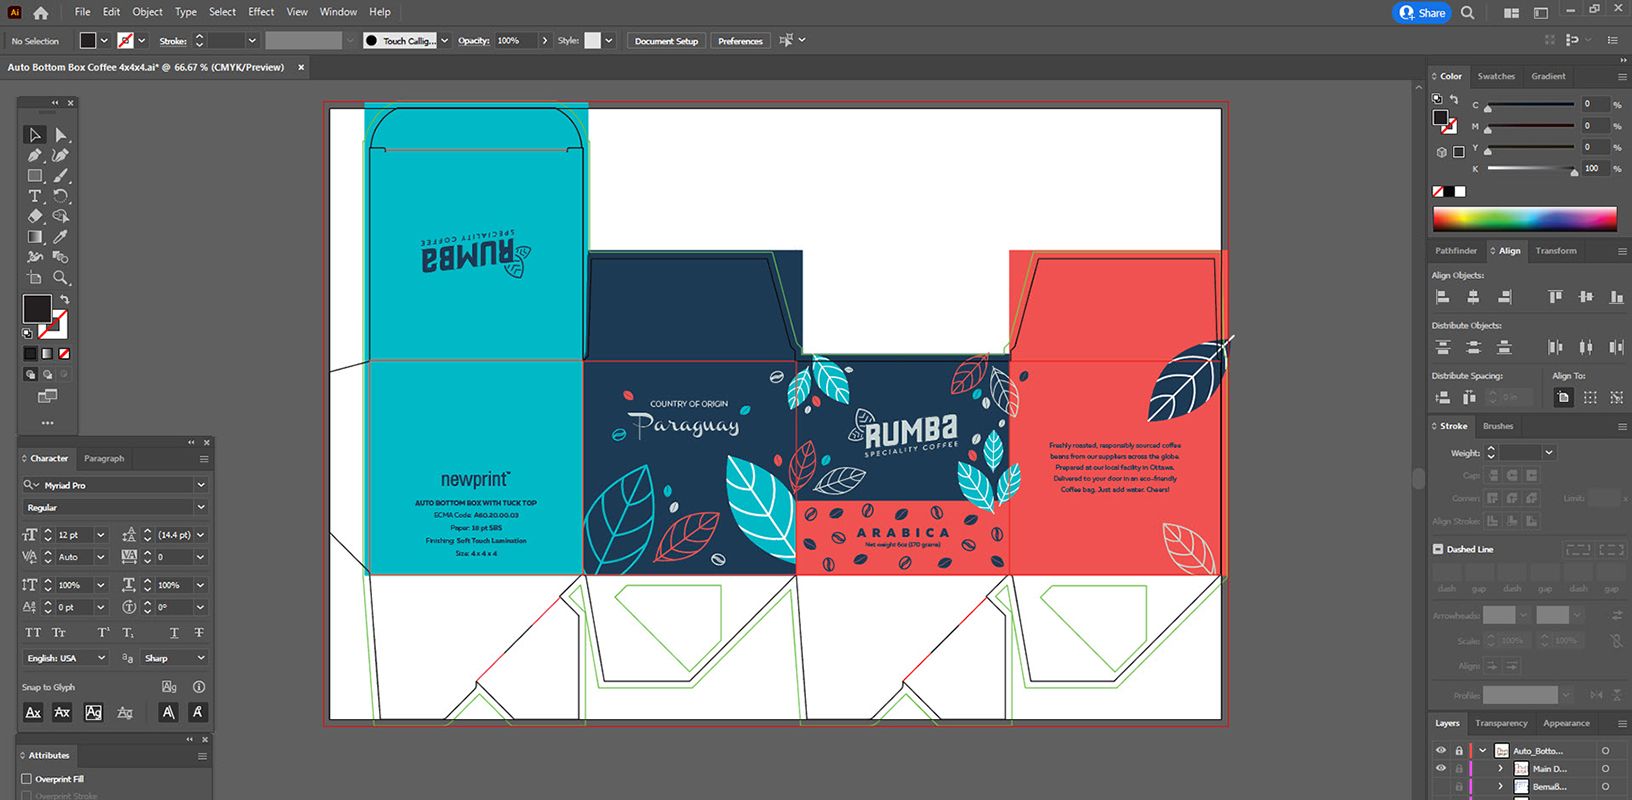 Adobe Illustrator document with a box dieline and a box design applied.